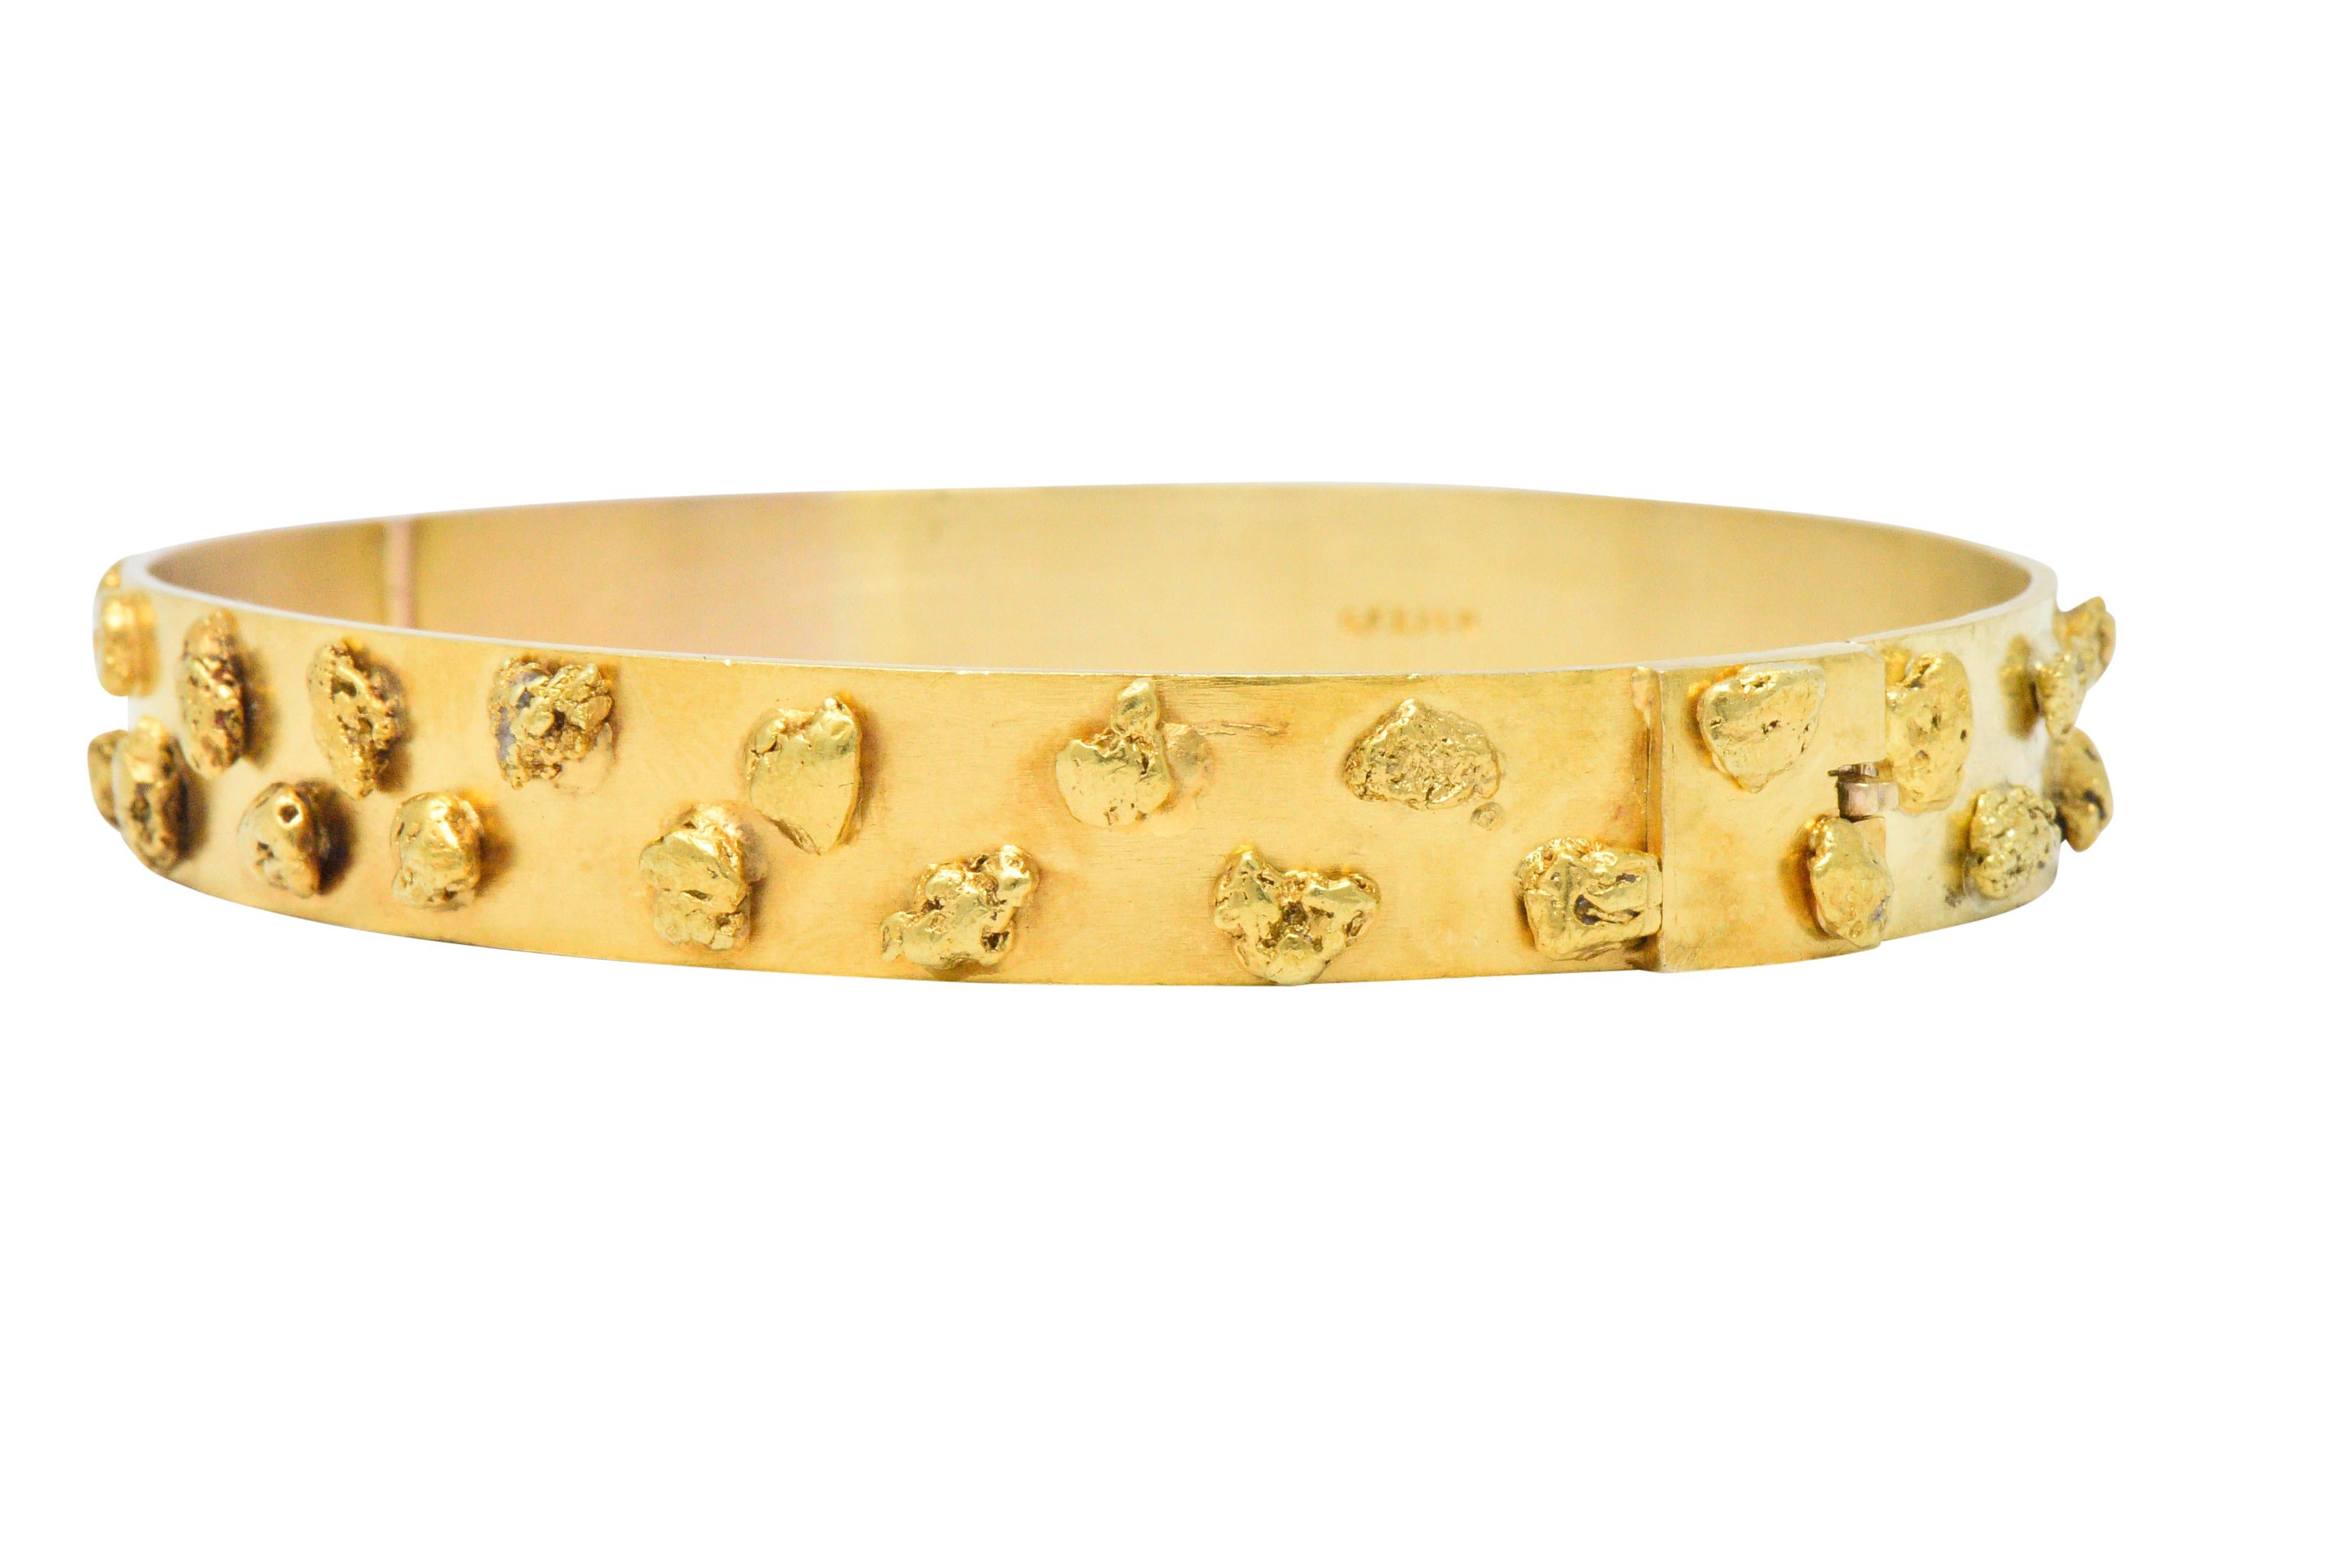 Designed as a flat hinged bangle with applied gold 